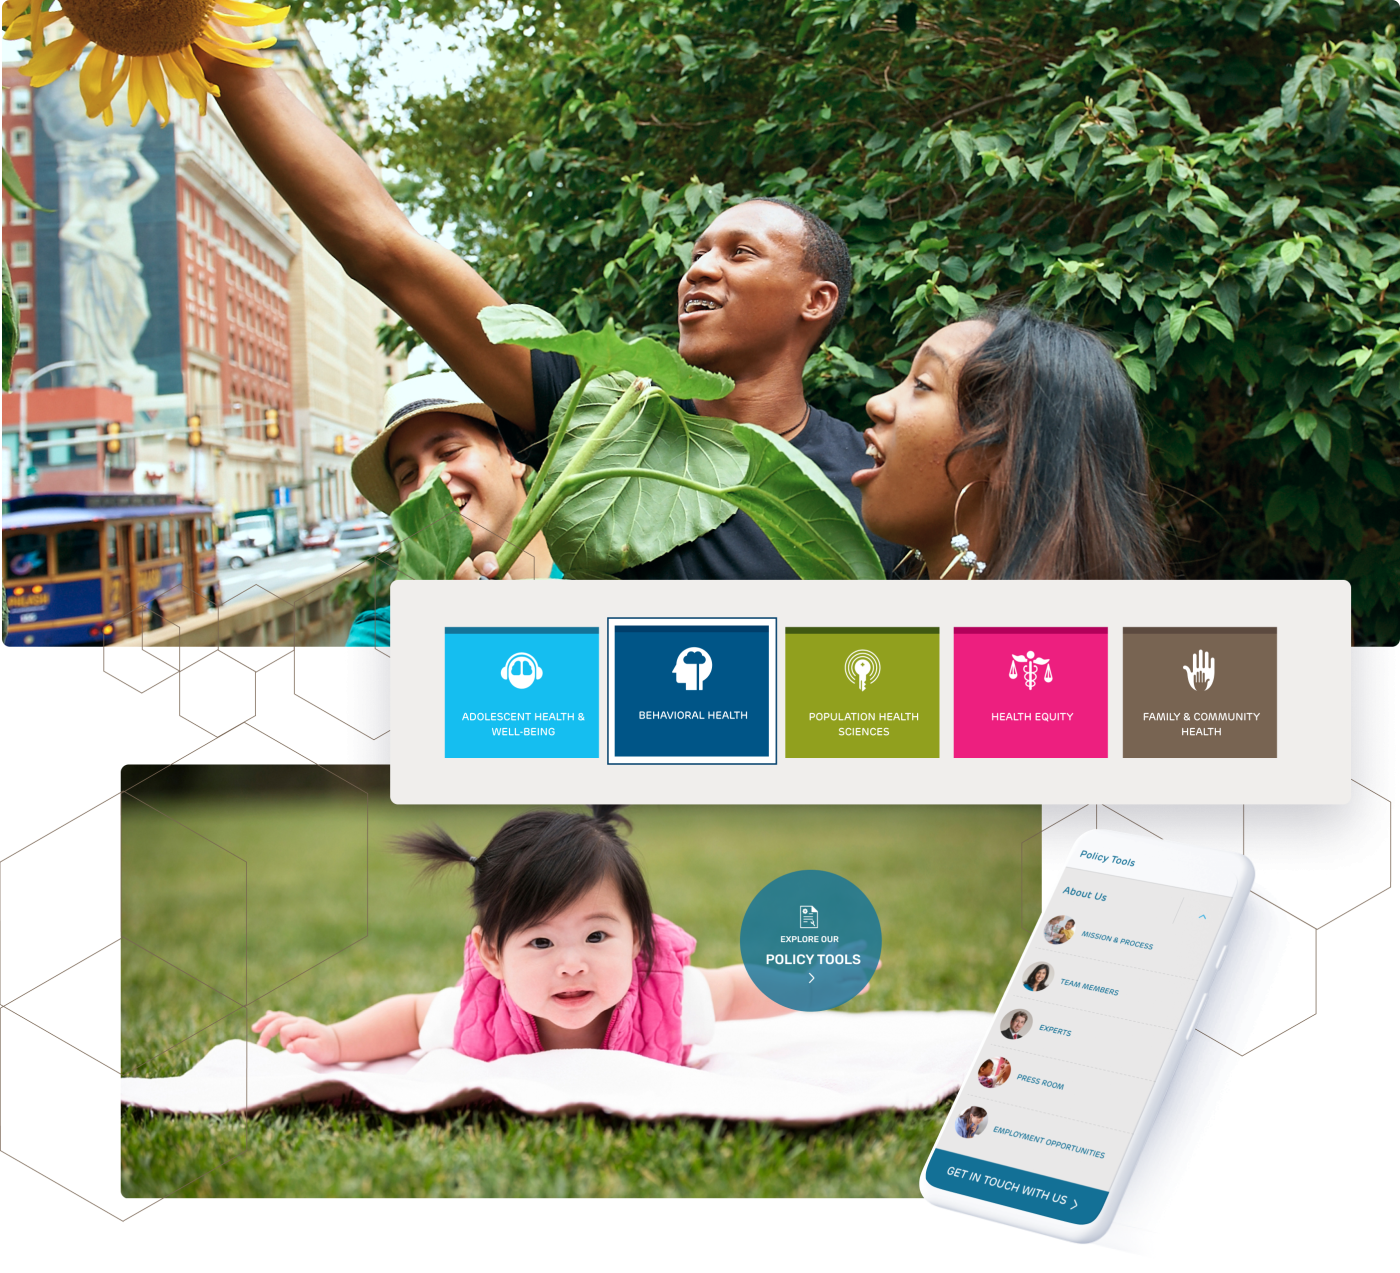 A collage of Policy Lab's new iconography for their website using bold shades of blue, green, and pink. In this collage, there is also a smartphone showcasing how the website looks on mobile. Highlighting the new color palette, the background shows two photos, the first is a group of teenagers picking a sunflower, and the second is the photo of a toddler laying on a blanket in some grass.